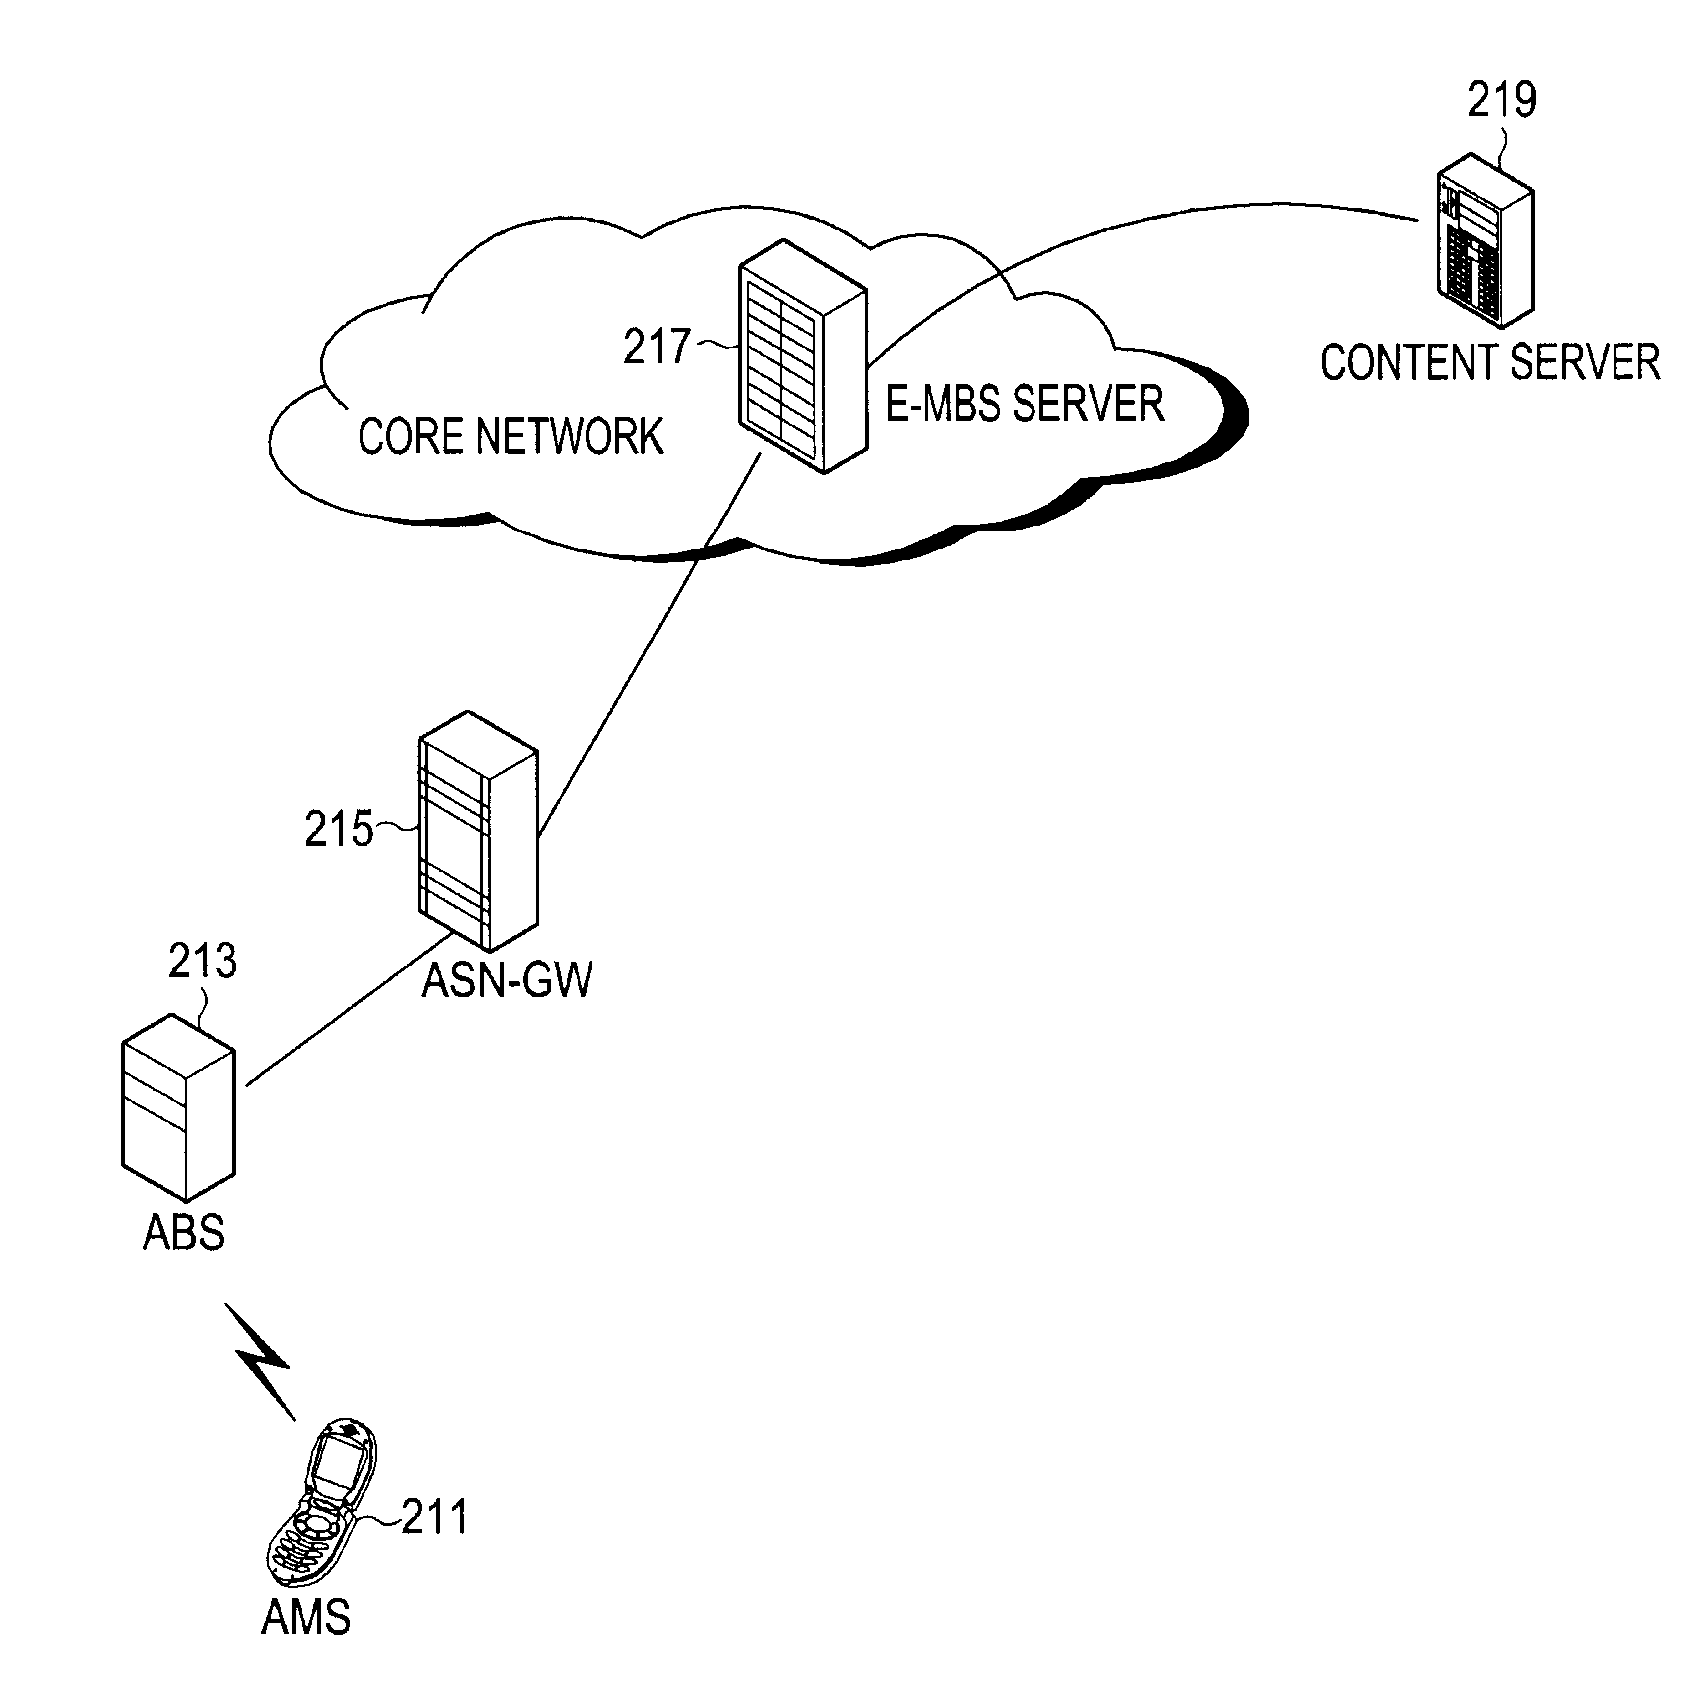 Apparatus and method for providing mobile IPTV service in mobile communication system and broadcasting system